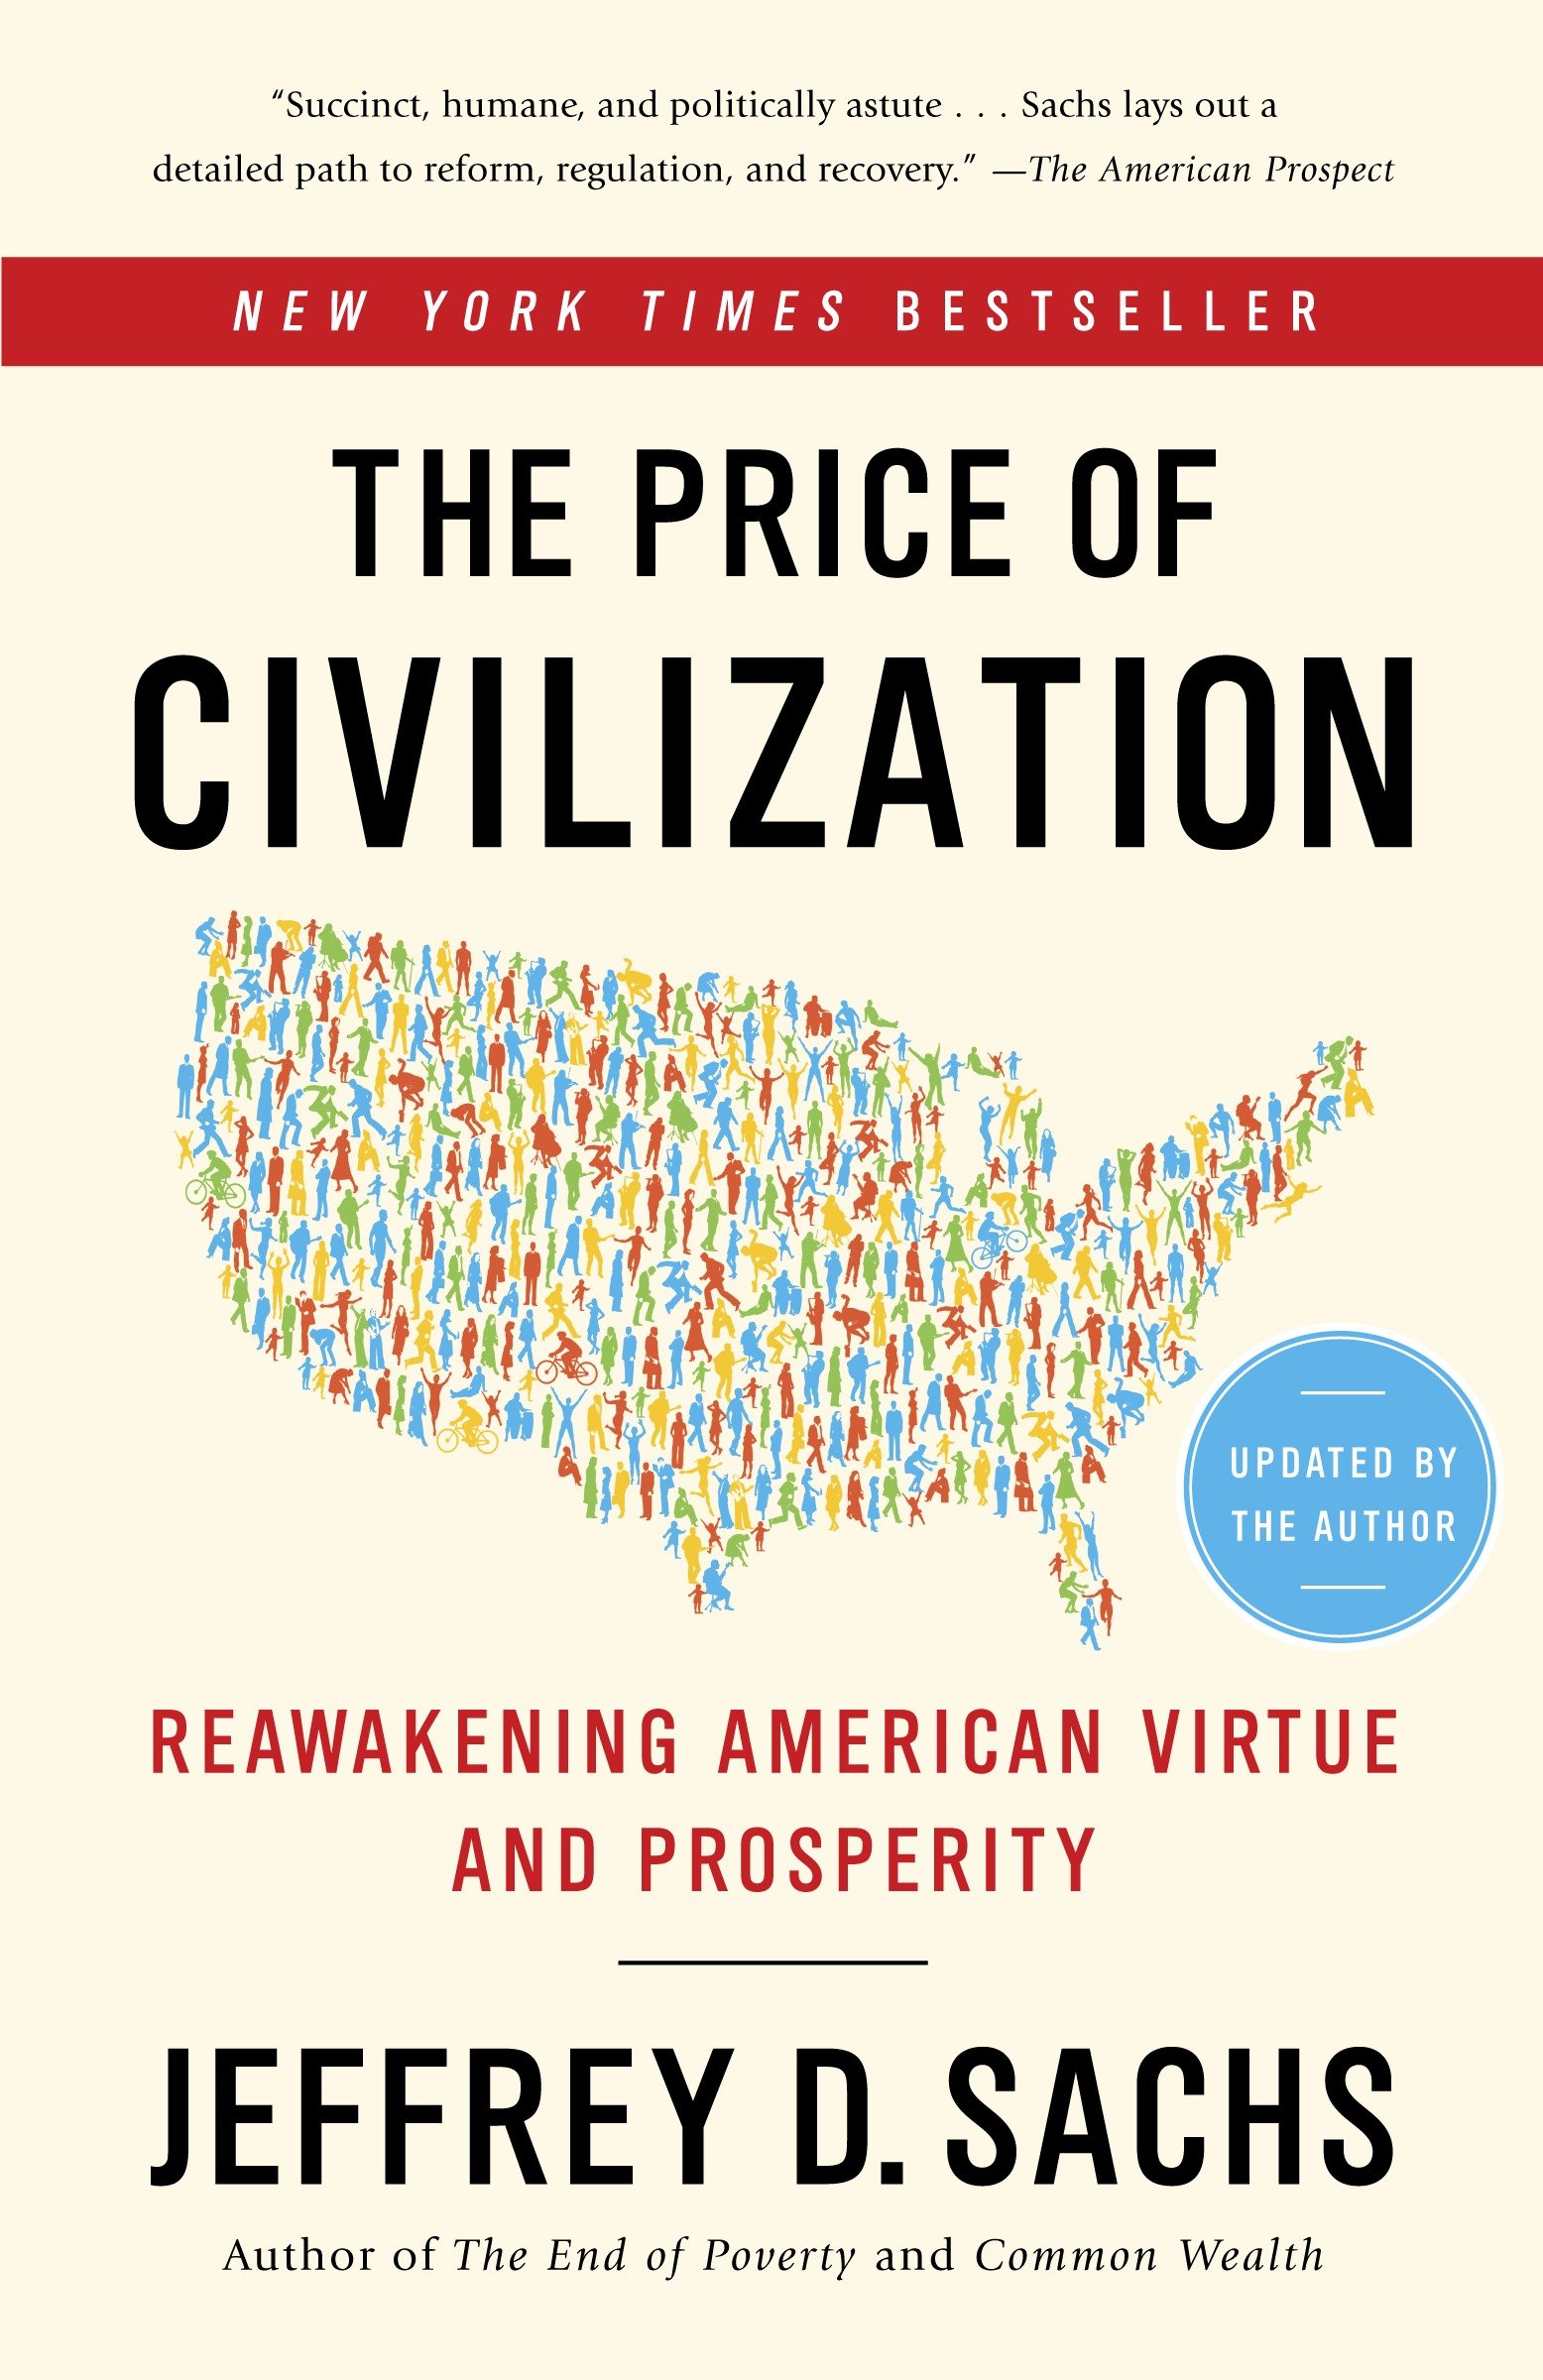 The price of civilization reawakening American virtue and prosperity cover image